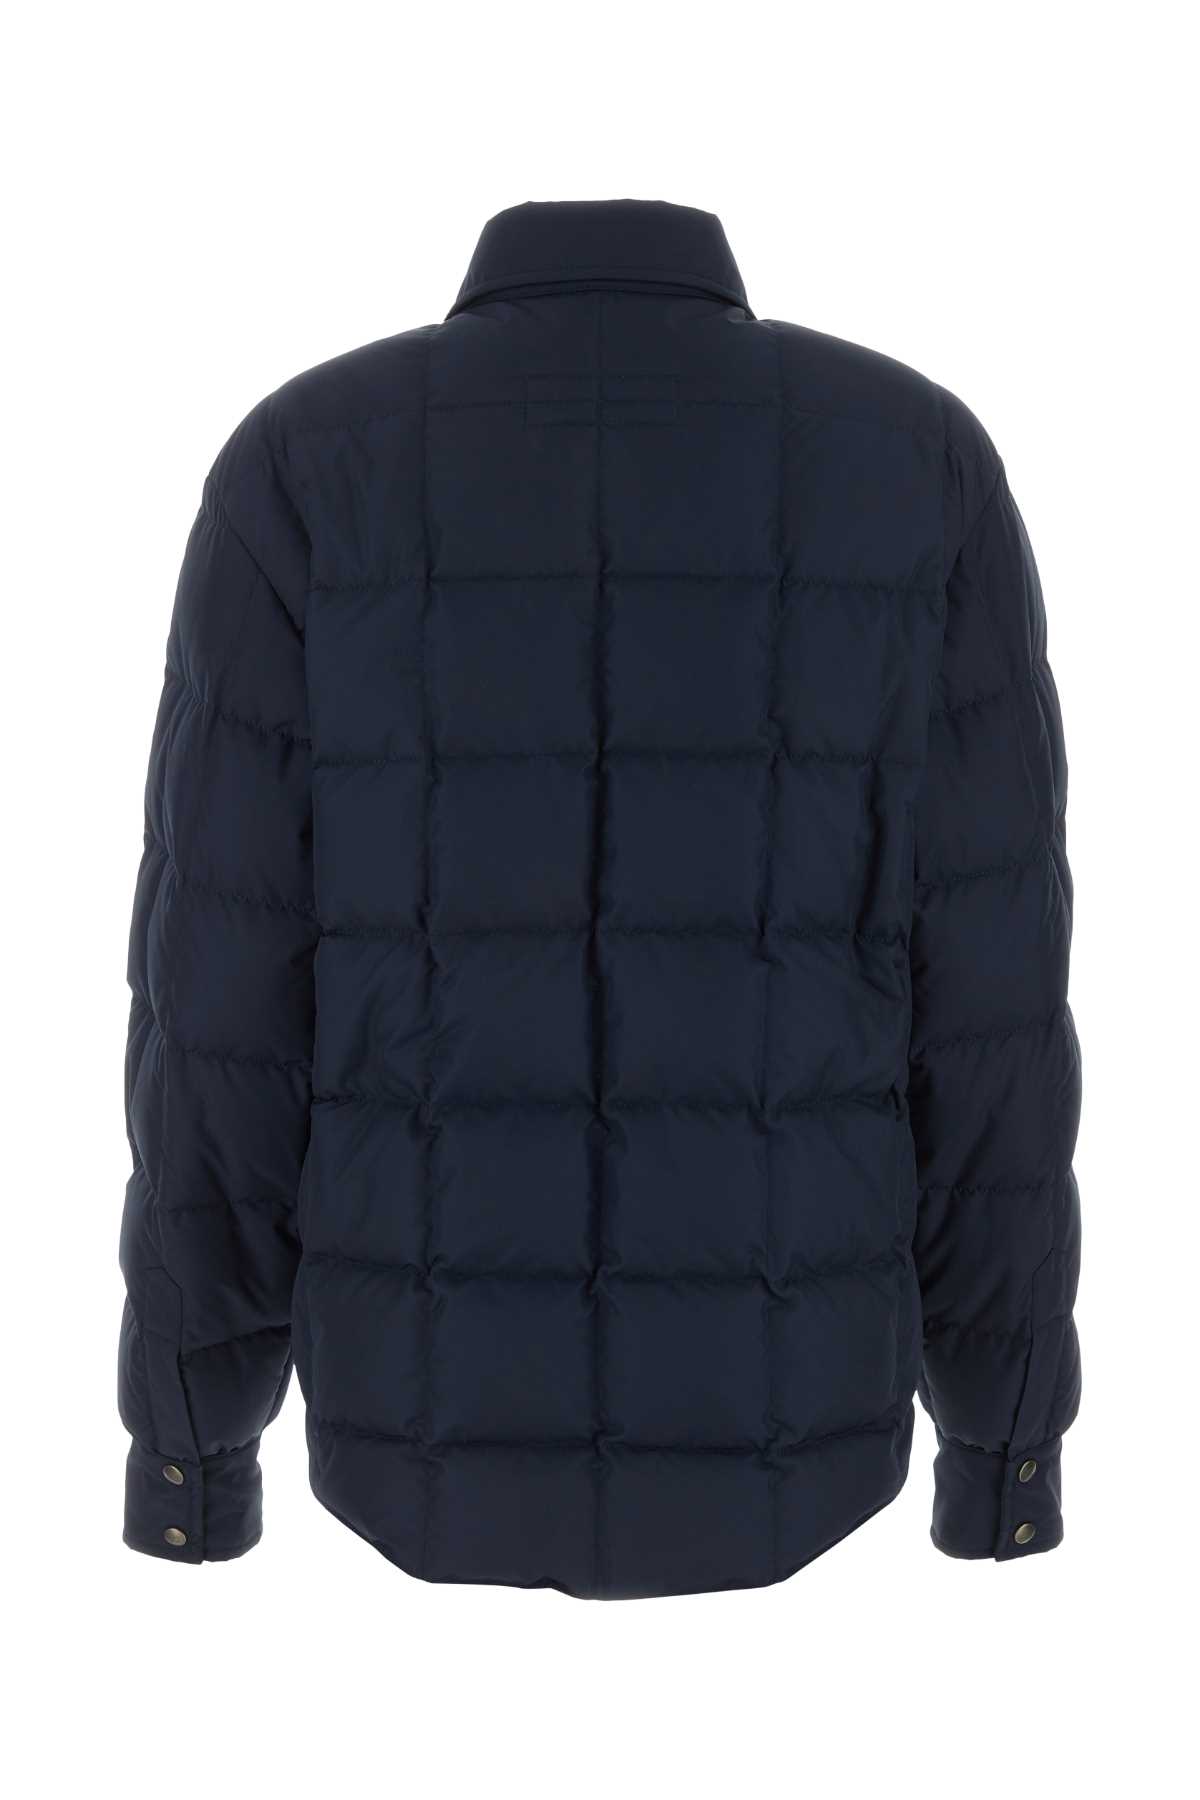 Fay Navy Blue Polyester Down Jacket In U812